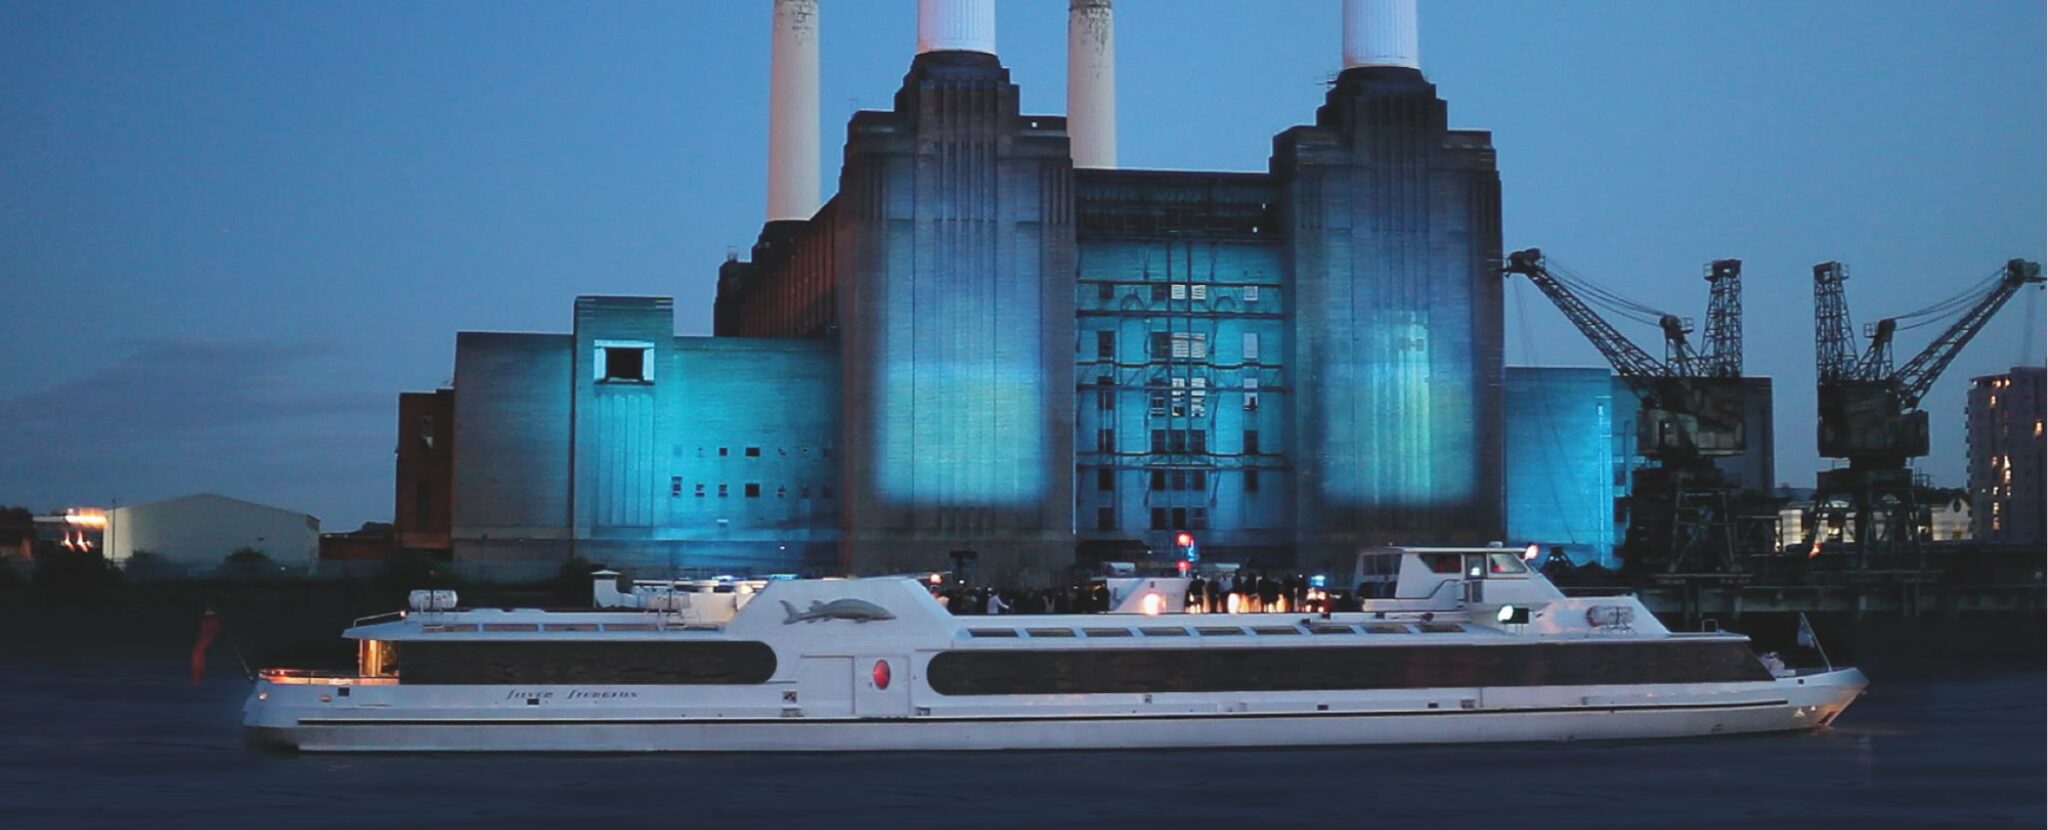 The Silver Sturgeon next to Battersea Power station